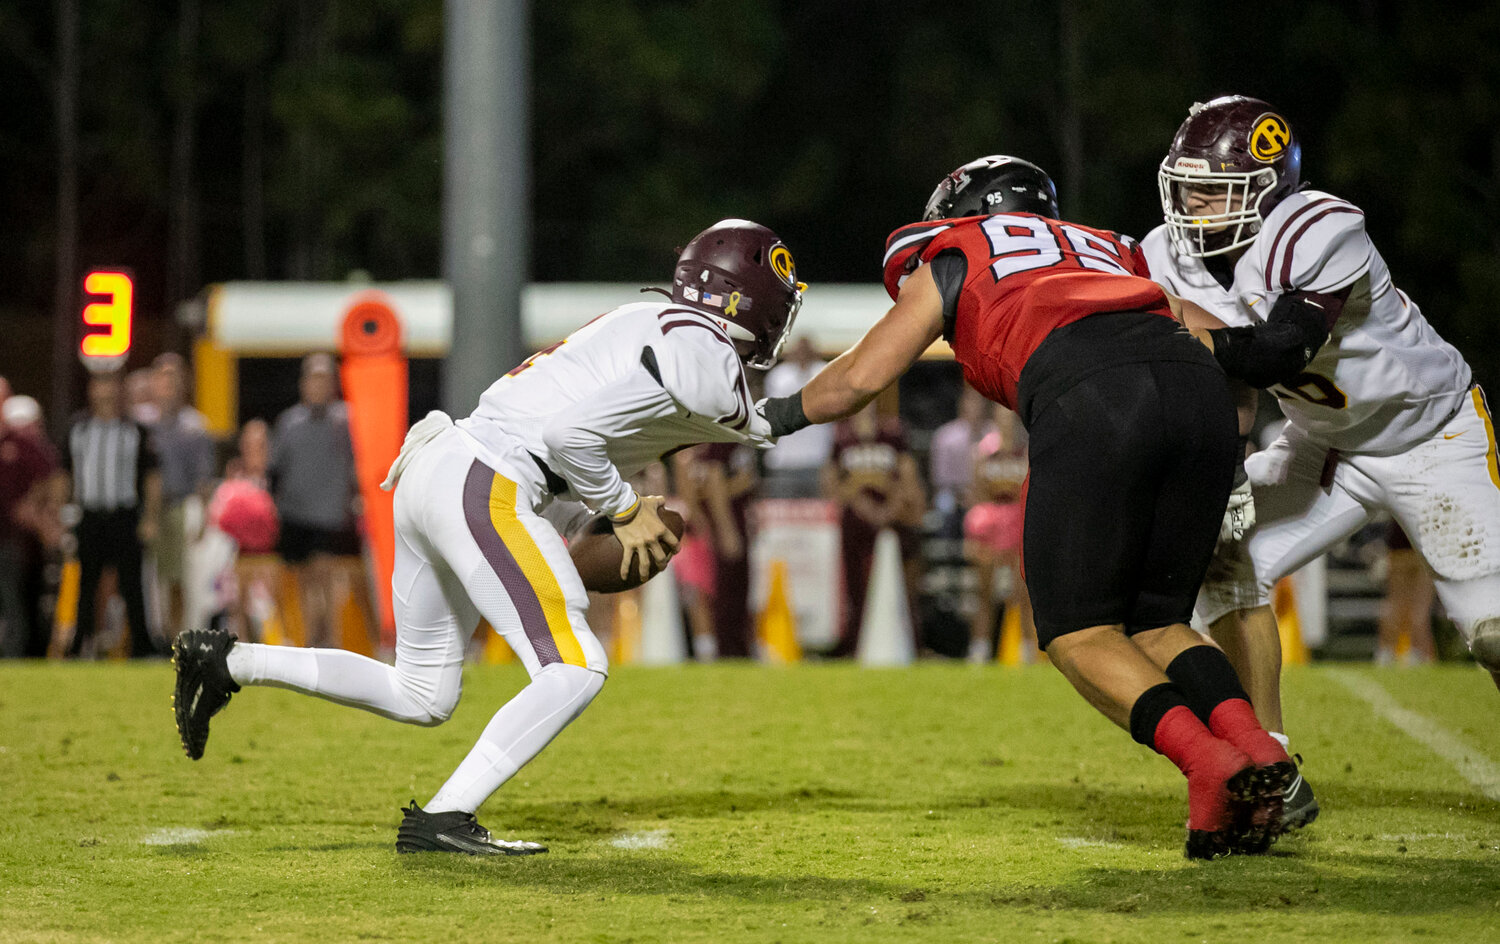 Spanish Fort senior Grey Freeman (95) collects Robertsdale sophomore Cameron Joseph (4) for a first-half sack during the Toros’ homecoming contest against the Golden Bears on The Hill Friday night. Freeman and the Spanish Fort defense pitched its second shutout of the season to secure a 45-0 win.